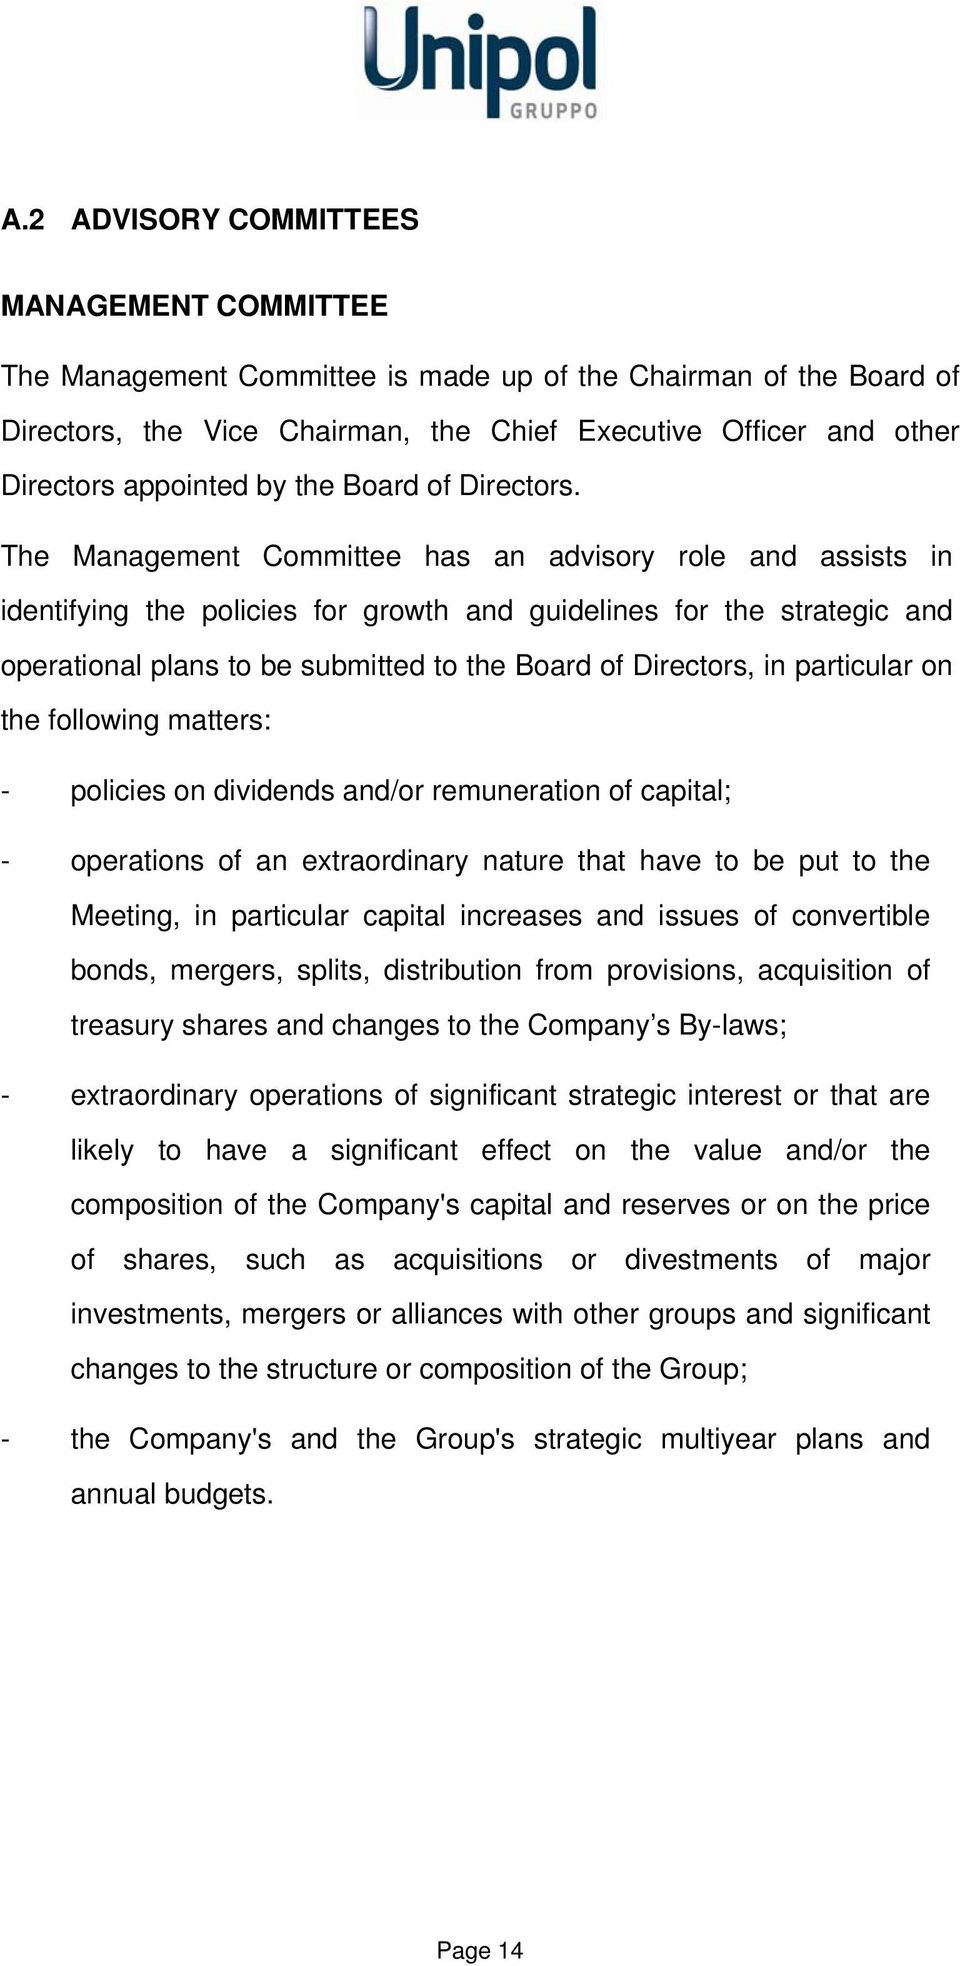 The Management Committee has an advisory role and assists in identifying the policies for growth and guidelines for the strategic and operational plans to be submitted to the Board of Directors, in